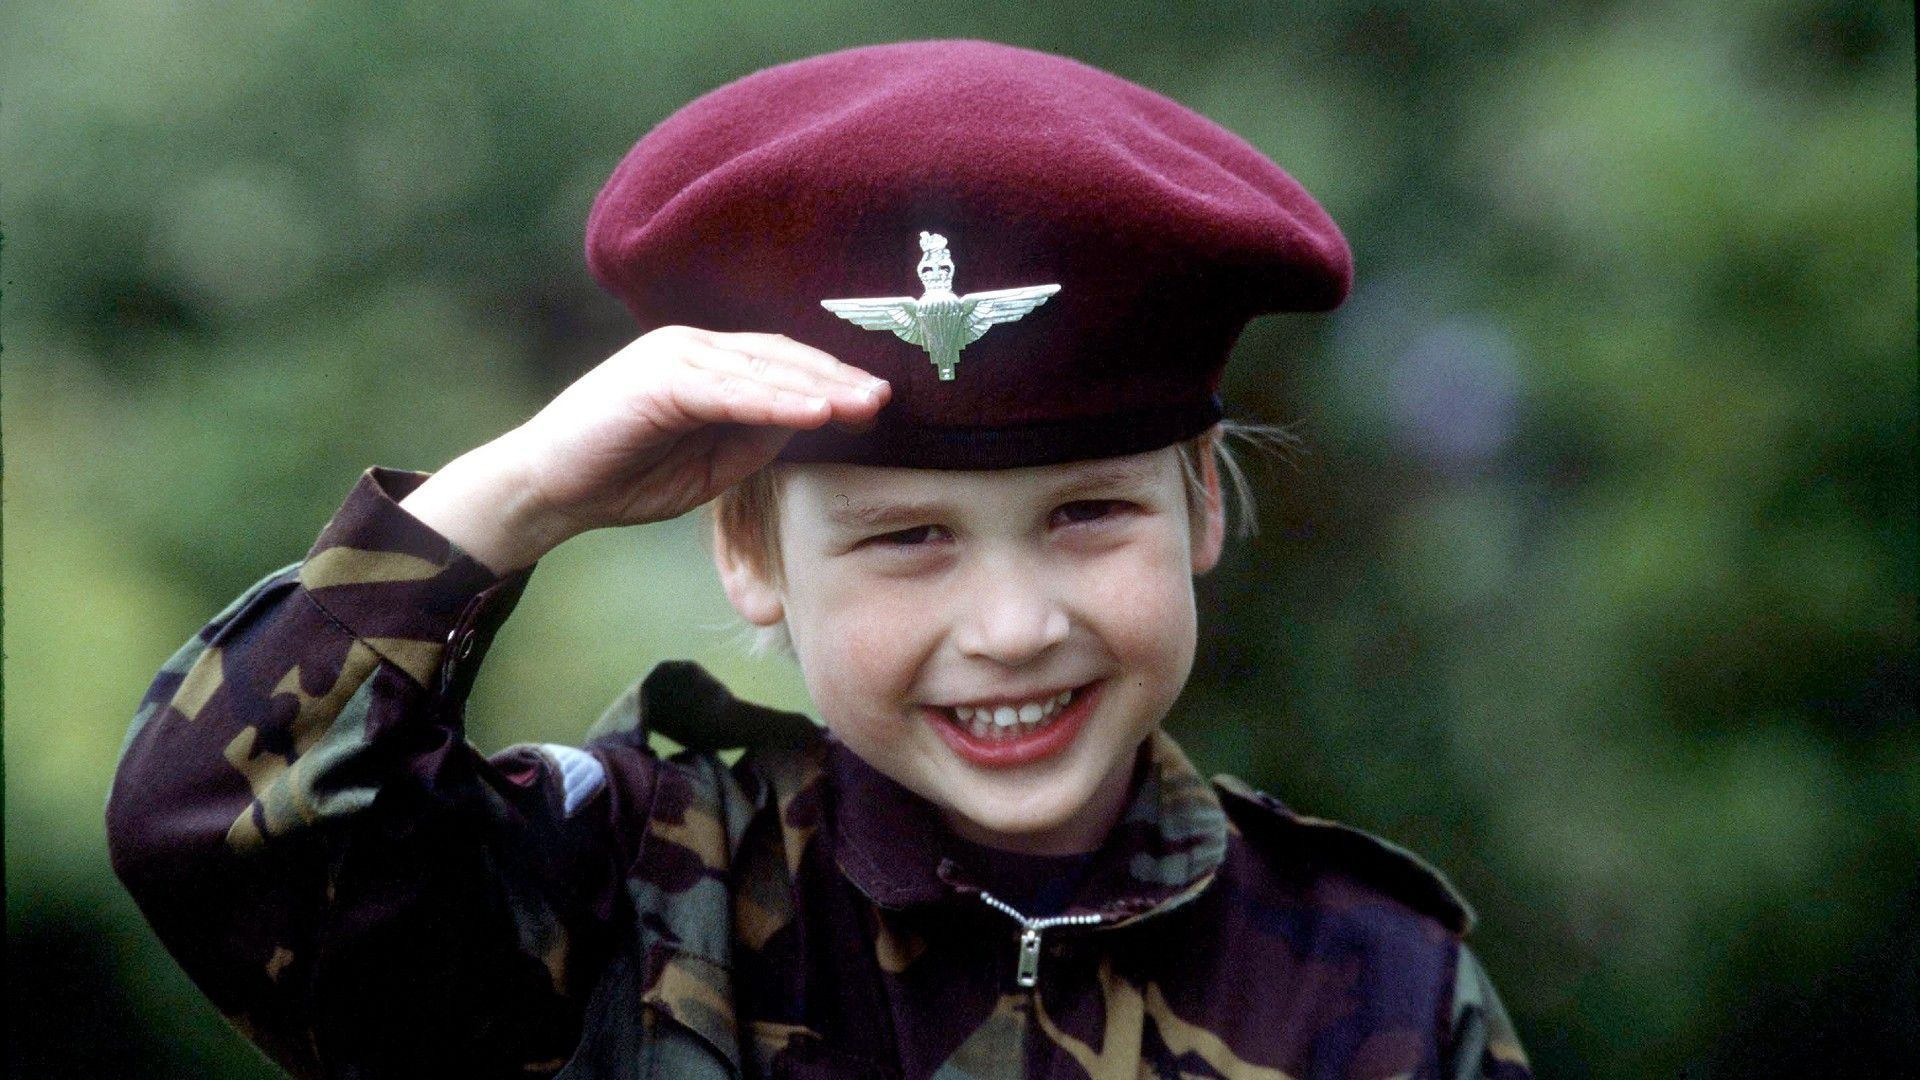 <p>                     Looking like butter wouldn't melt, a young Prince William posed in the Parachute Regiment Uniform at the gardens of King Charles' Highgrove estate in 1986.                   </p>                                      <p>                     While it can't be confirmed, this could be one of the Prince's first military salutes caught on camera - but far from his last. After university, William trained at the Royal Military Academy Sandhurst before serving with the Blues and Royals.                   </p>                                      <p>                     He also flew for the RAF search and rescue team and served as an ambulance pilot for two years.                   </p>